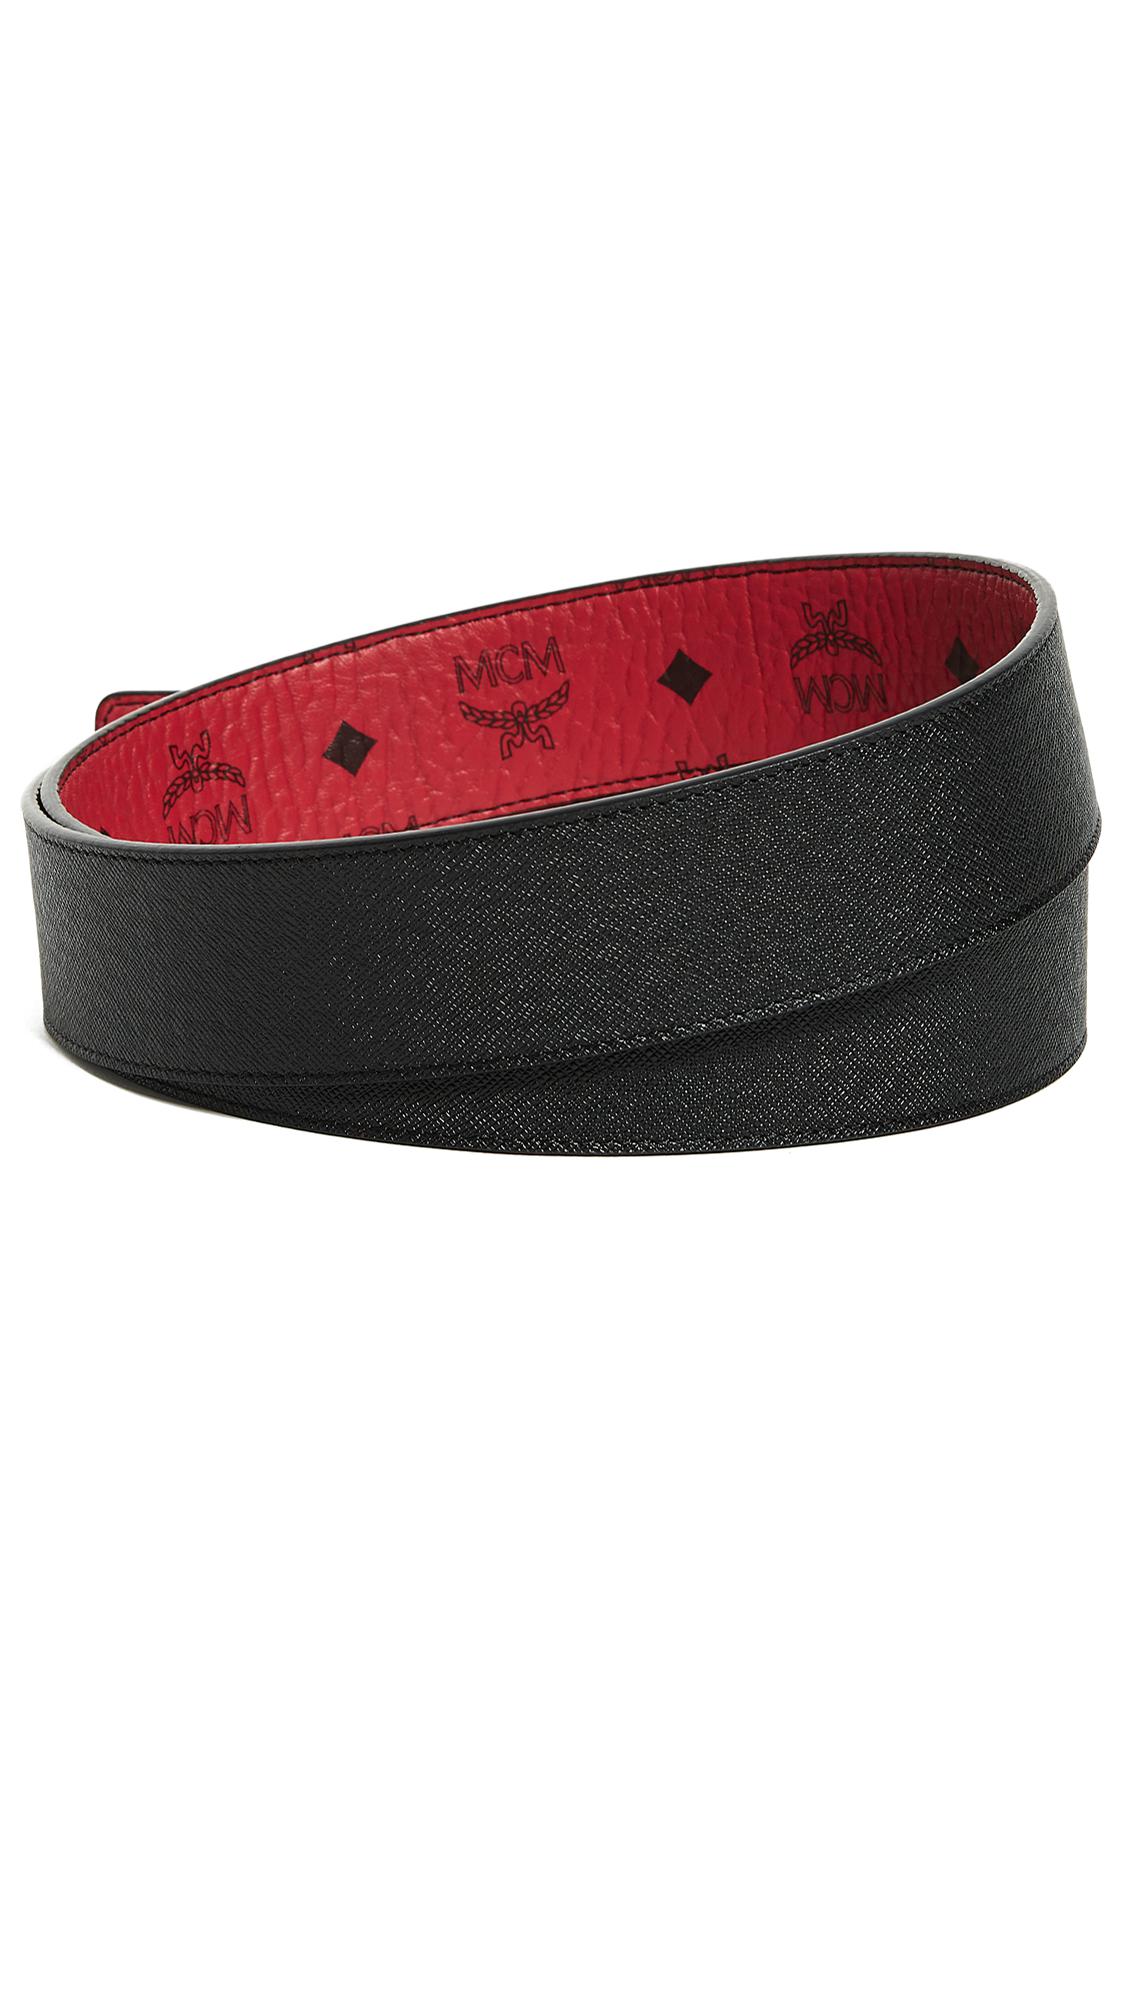 MCM Leather Gold M Buckle Reversible Belt in Red & Gold (Red) for Men - Lyst